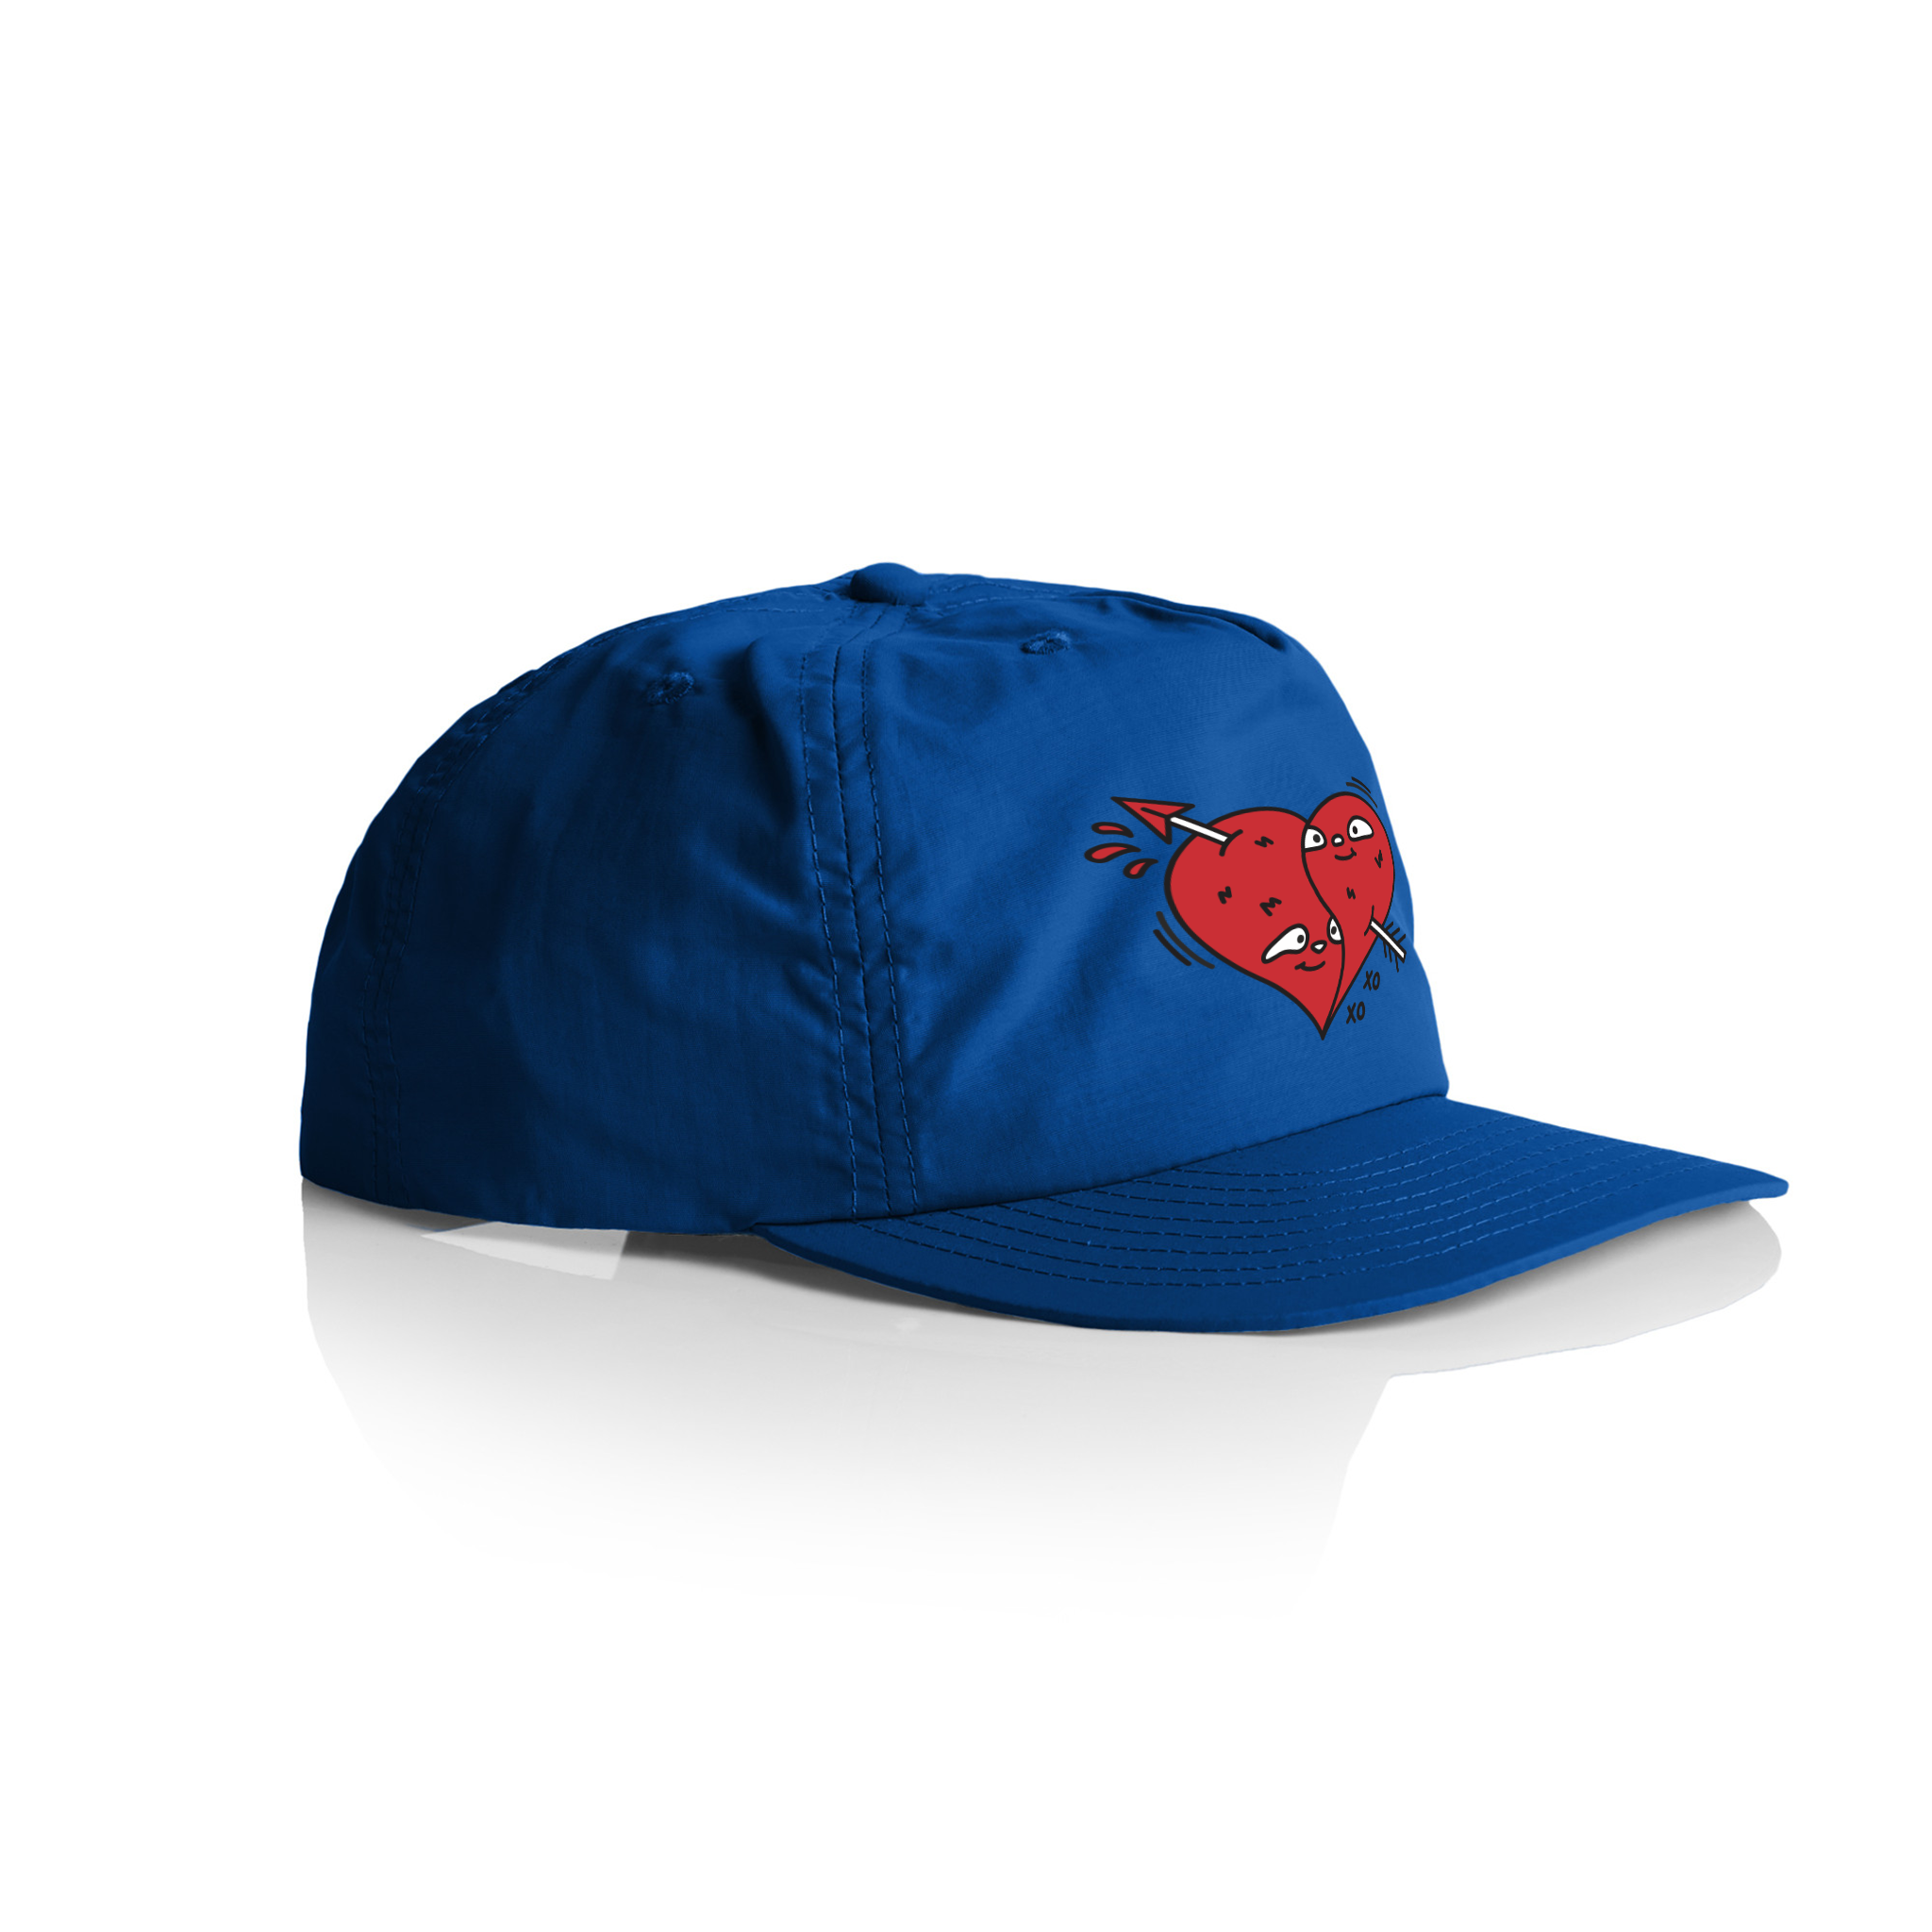 Two Hearts Cap